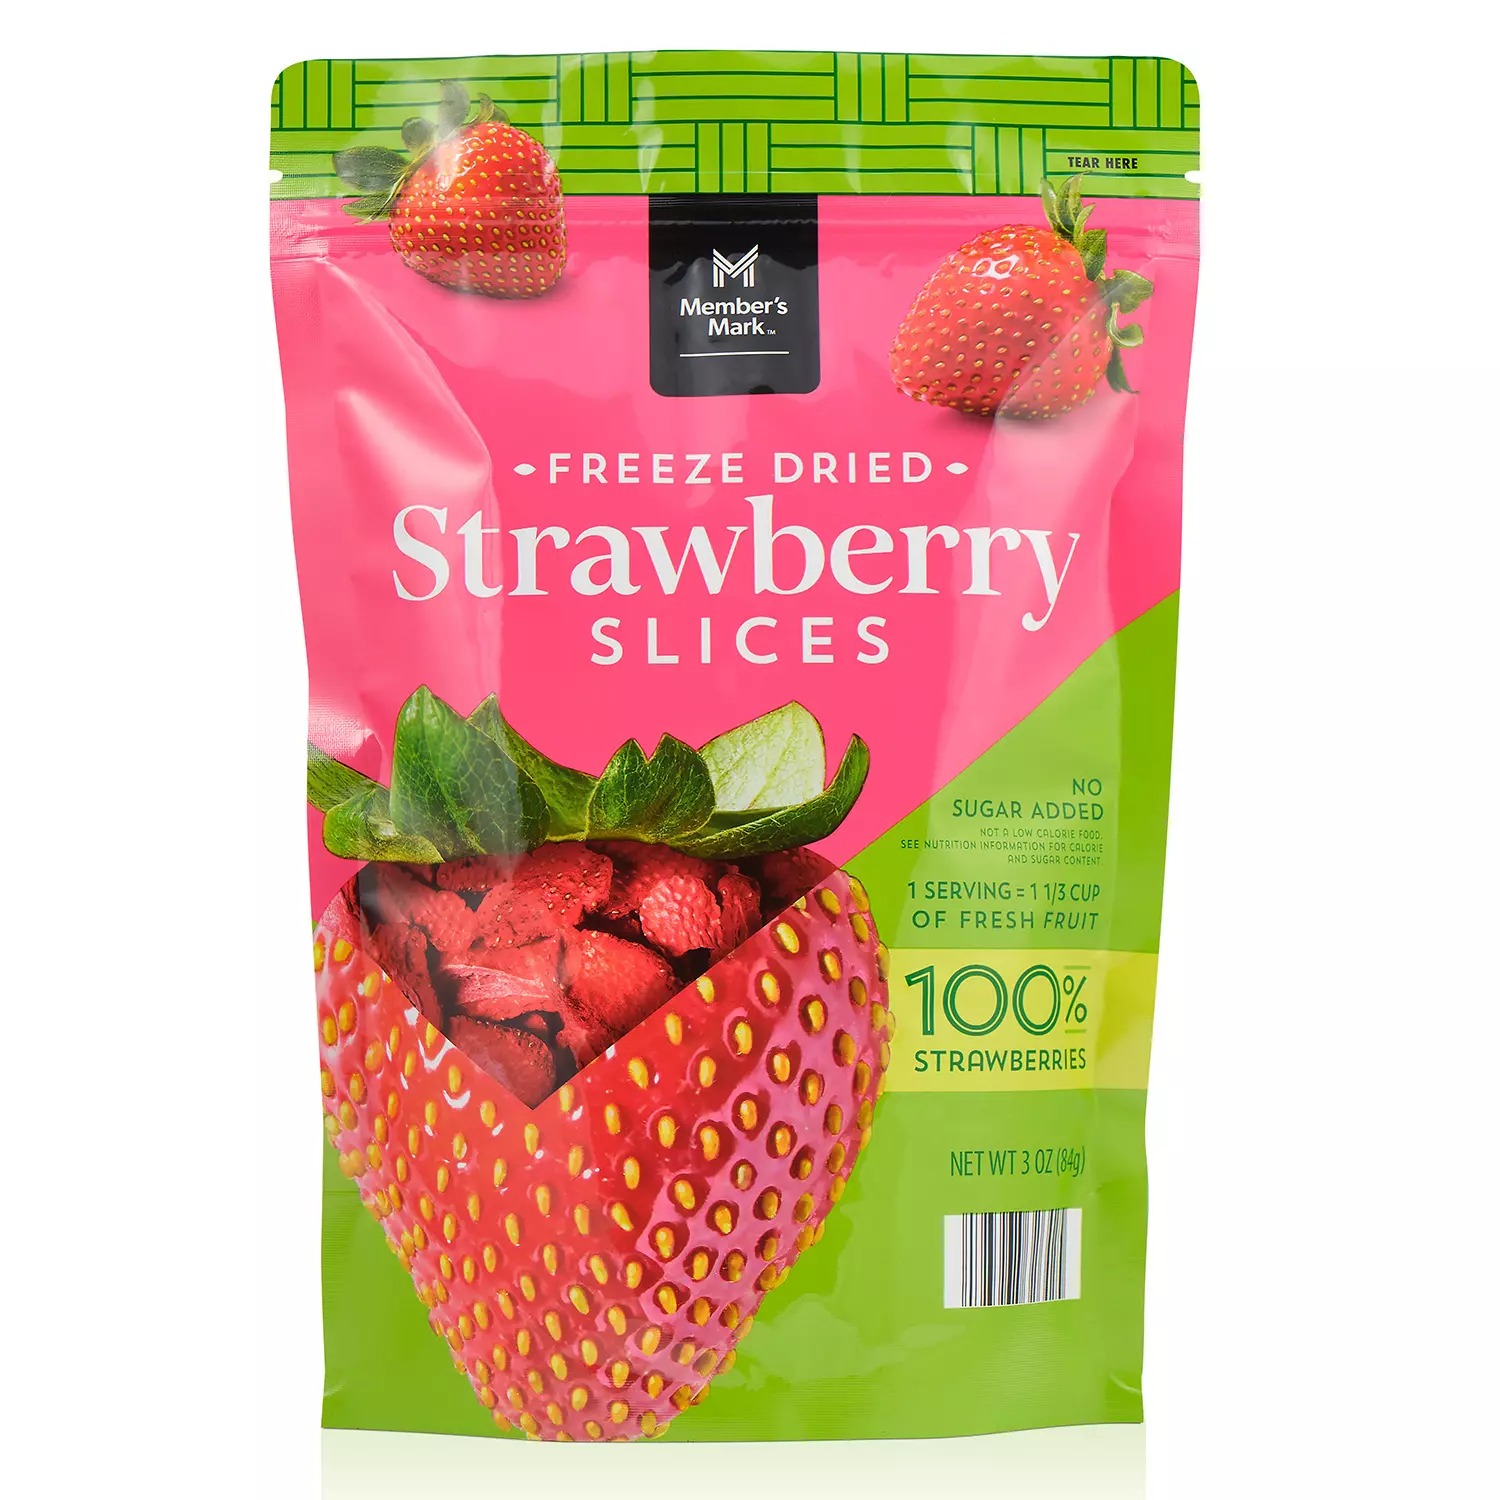 Member's Mark Freeze Dried Strawberry Slices